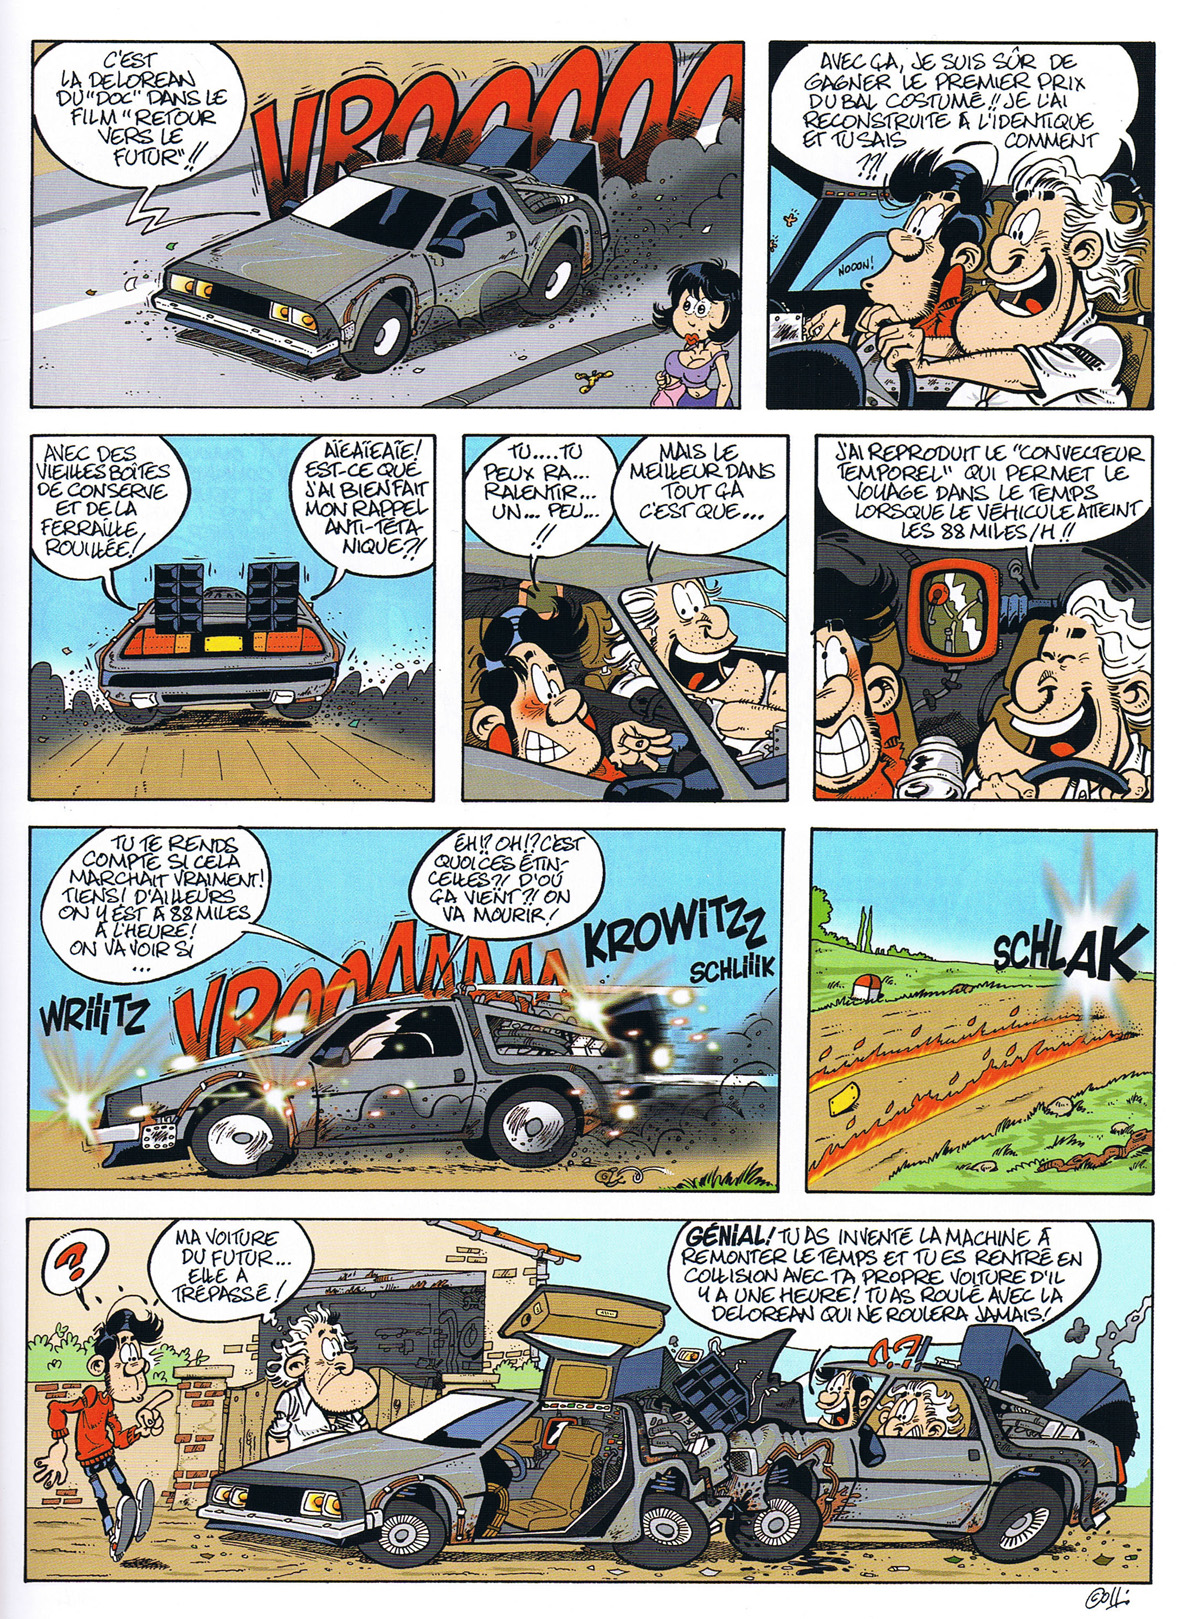 Extrait 1 Hot Road (tome 2)  - Tuning Movie